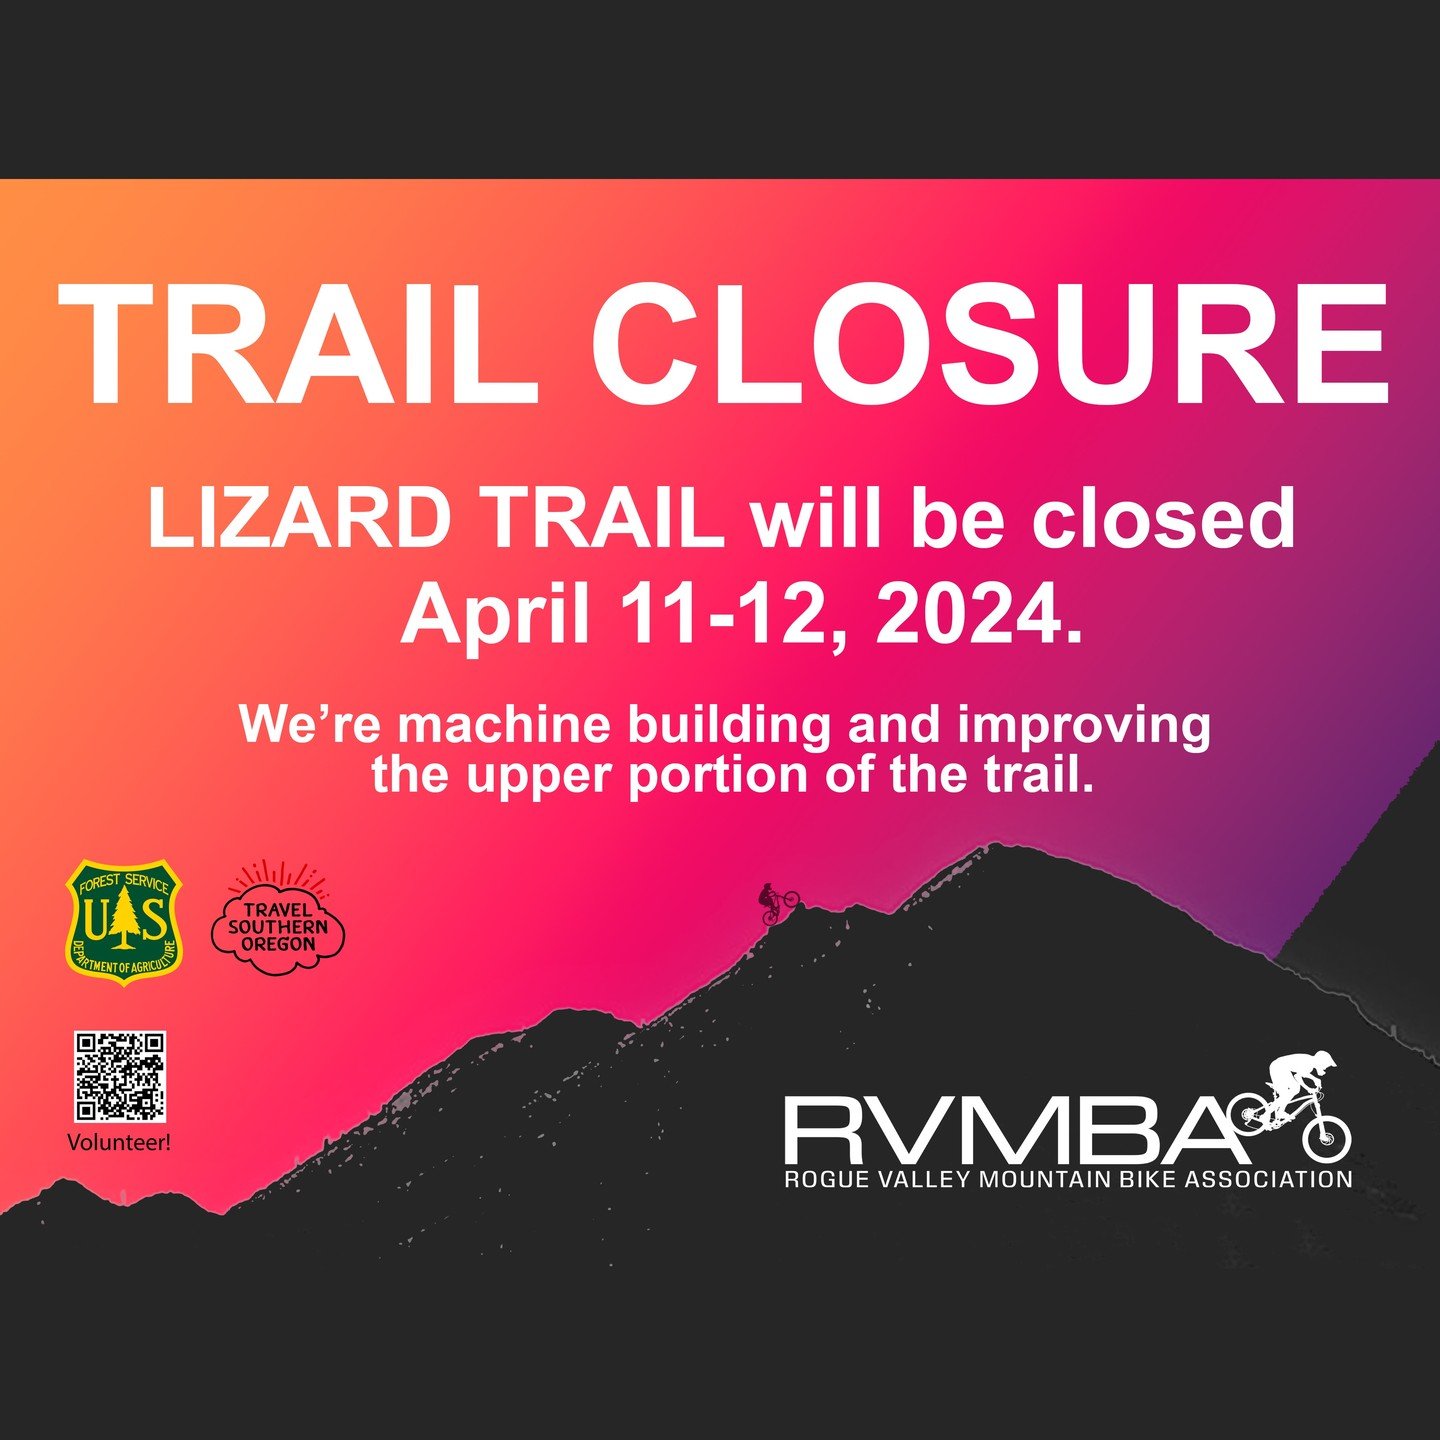 A year ago RVMBA made some massive improvements to one of, if not the most ridden trails in the Ashland watershed. But we're not done! Our amazing sponsors, @travelsouthernoregon have fully funded a professional build for the first third of the trail